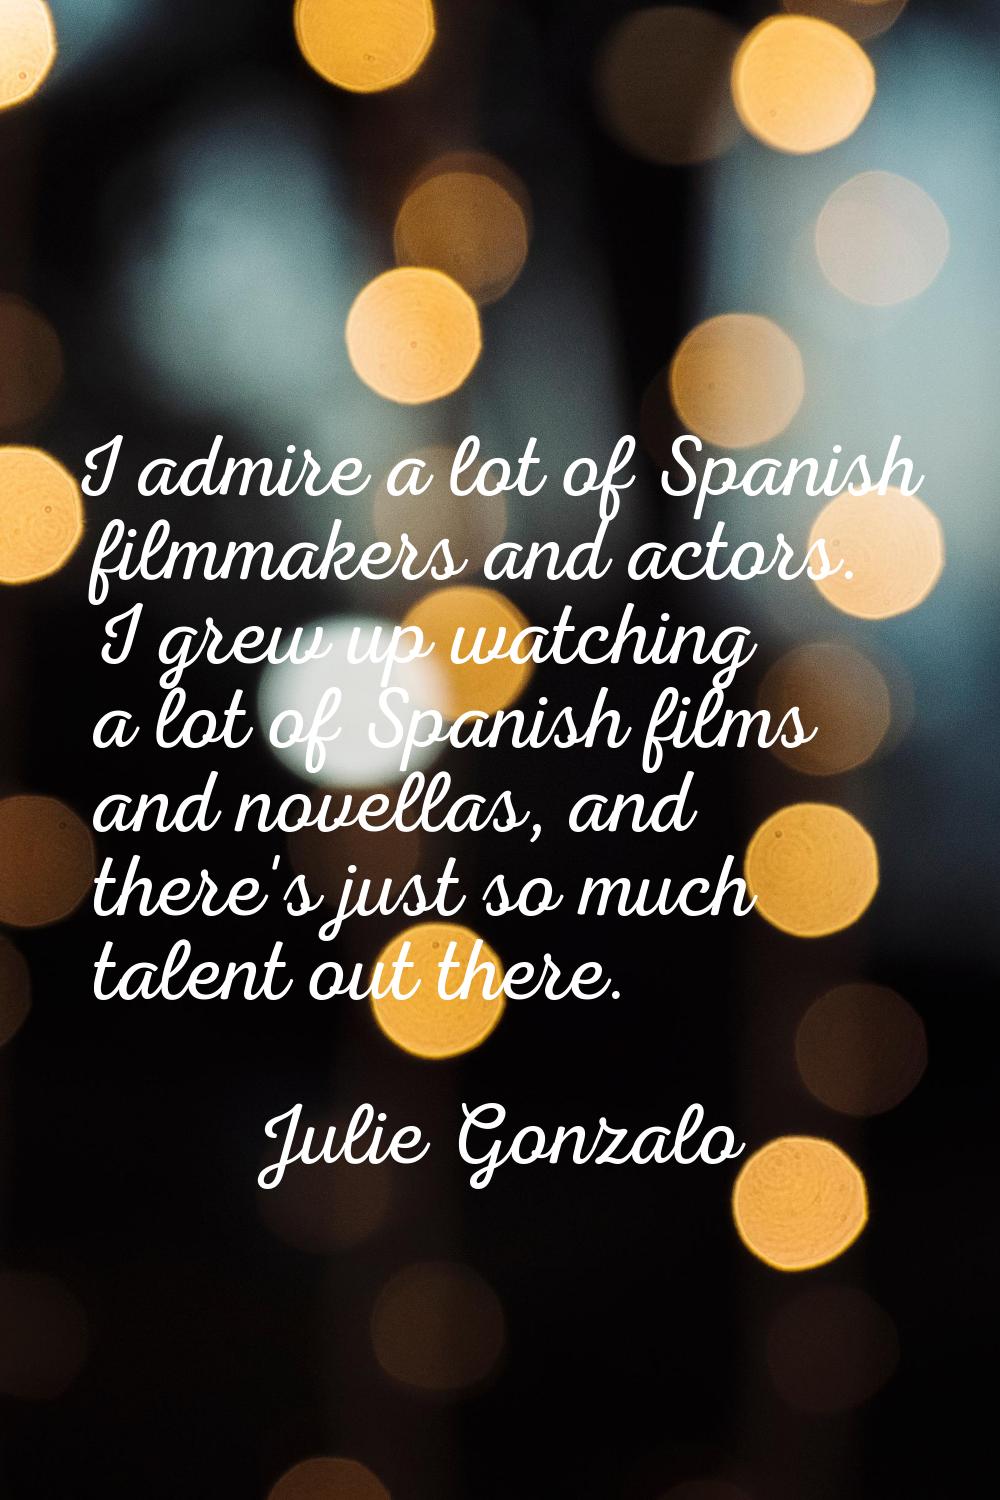 I admire a lot of Spanish filmmakers and actors. I grew up watching a lot of Spanish films and nove